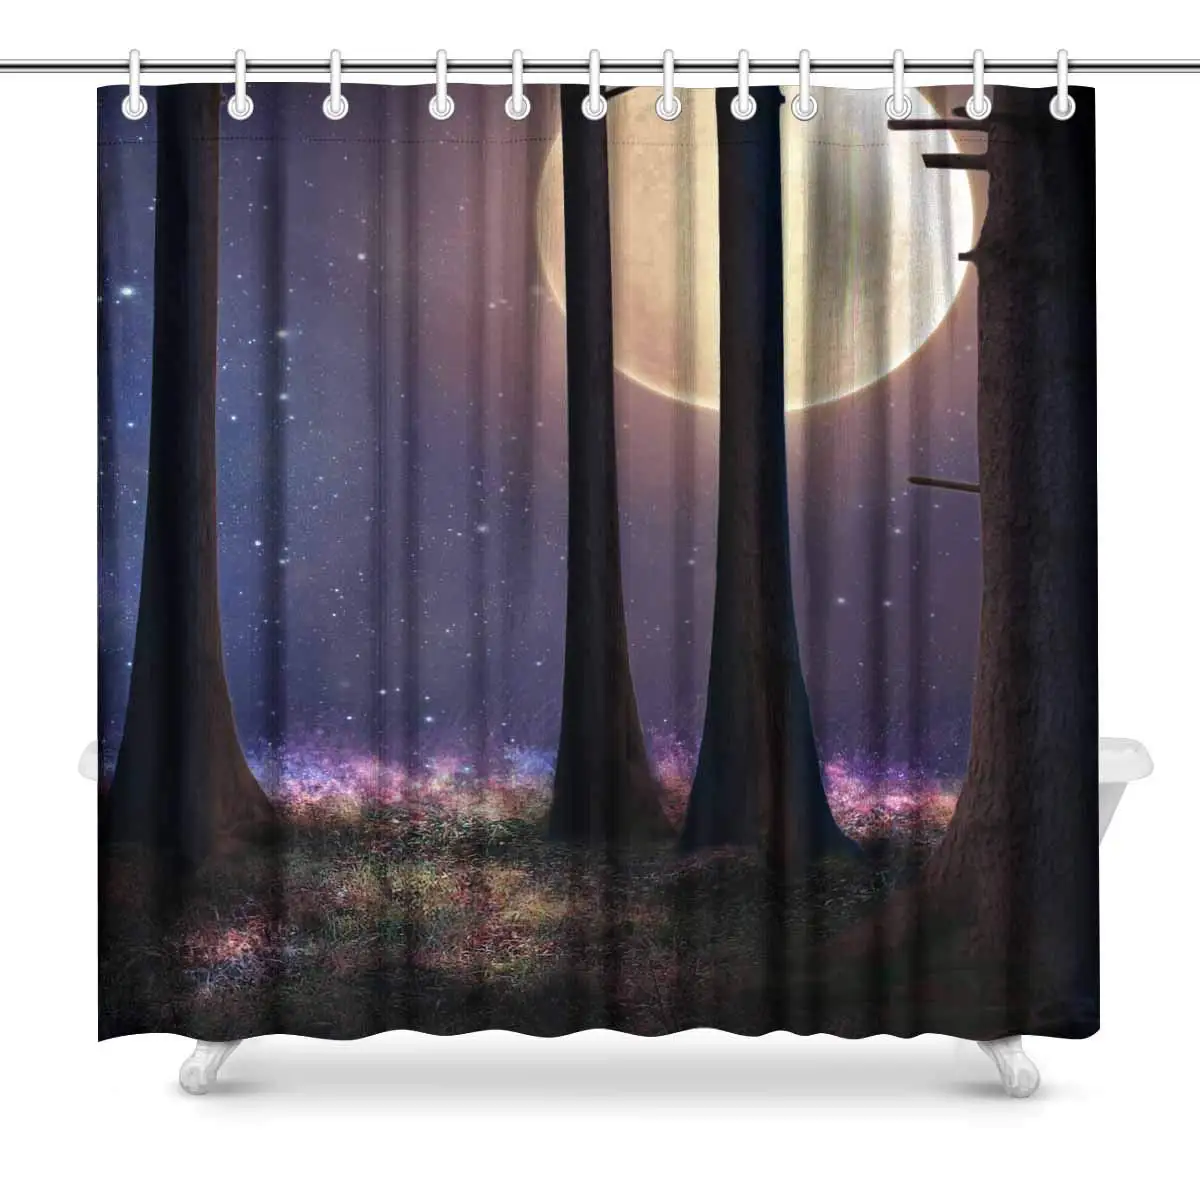 

Tall Trees Forest Illuminated with a Big Full Moon Waterproof Shower Curtain Decor Fabric Bathroom Set with Hooks, 72(Wide) x